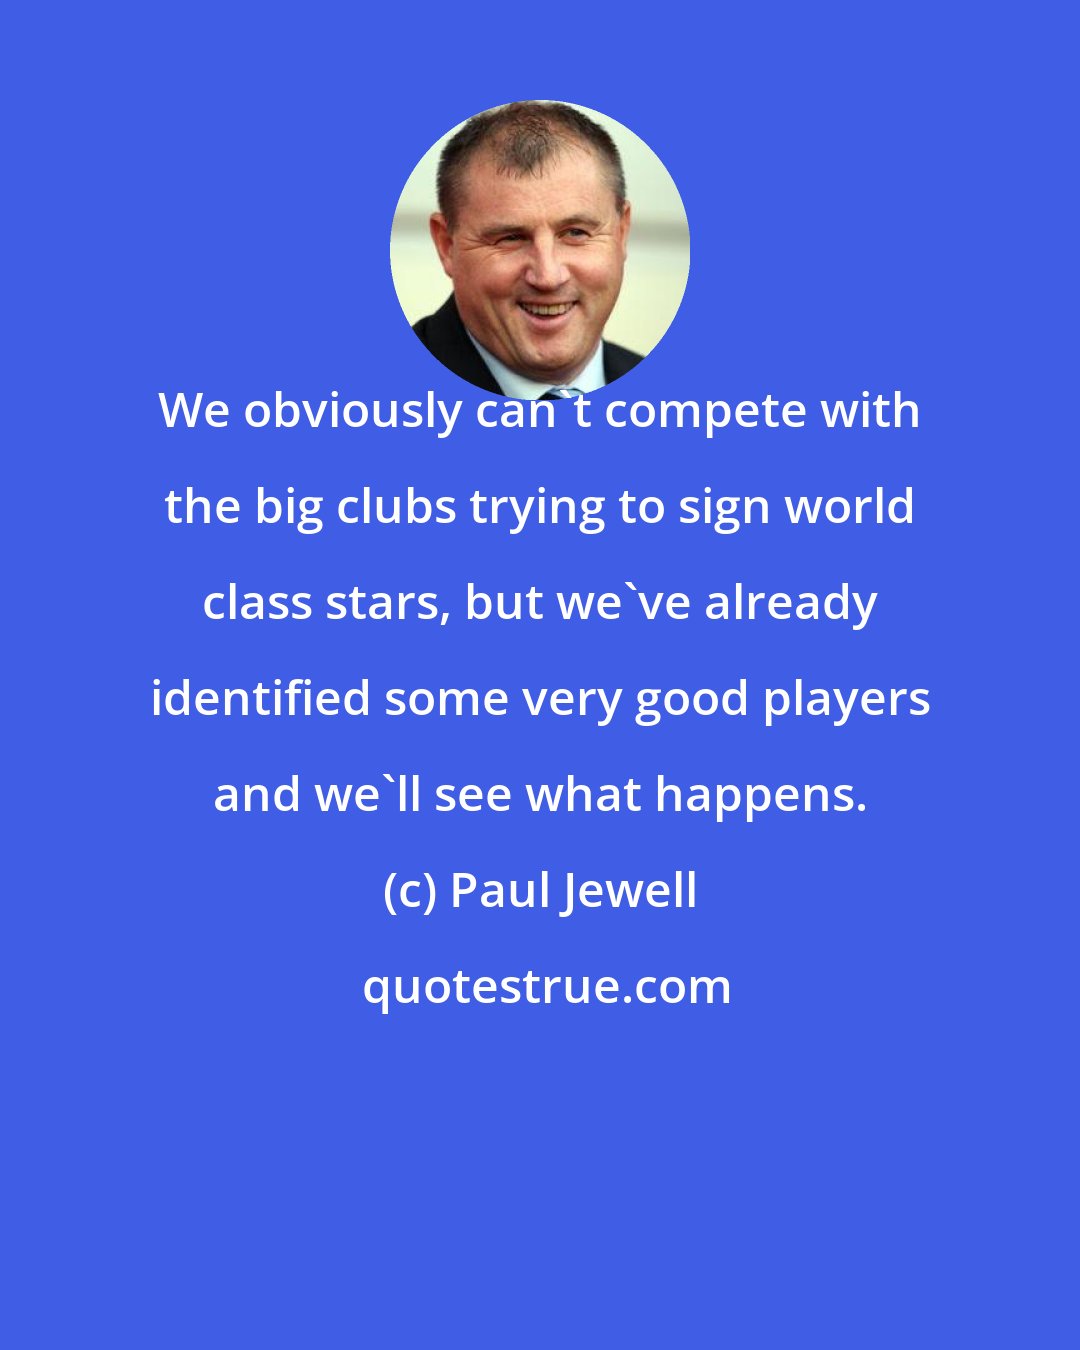 Paul Jewell: We obviously can't compete with the big clubs trying to sign world class stars, but we've already identified some very good players and we'll see what happens.